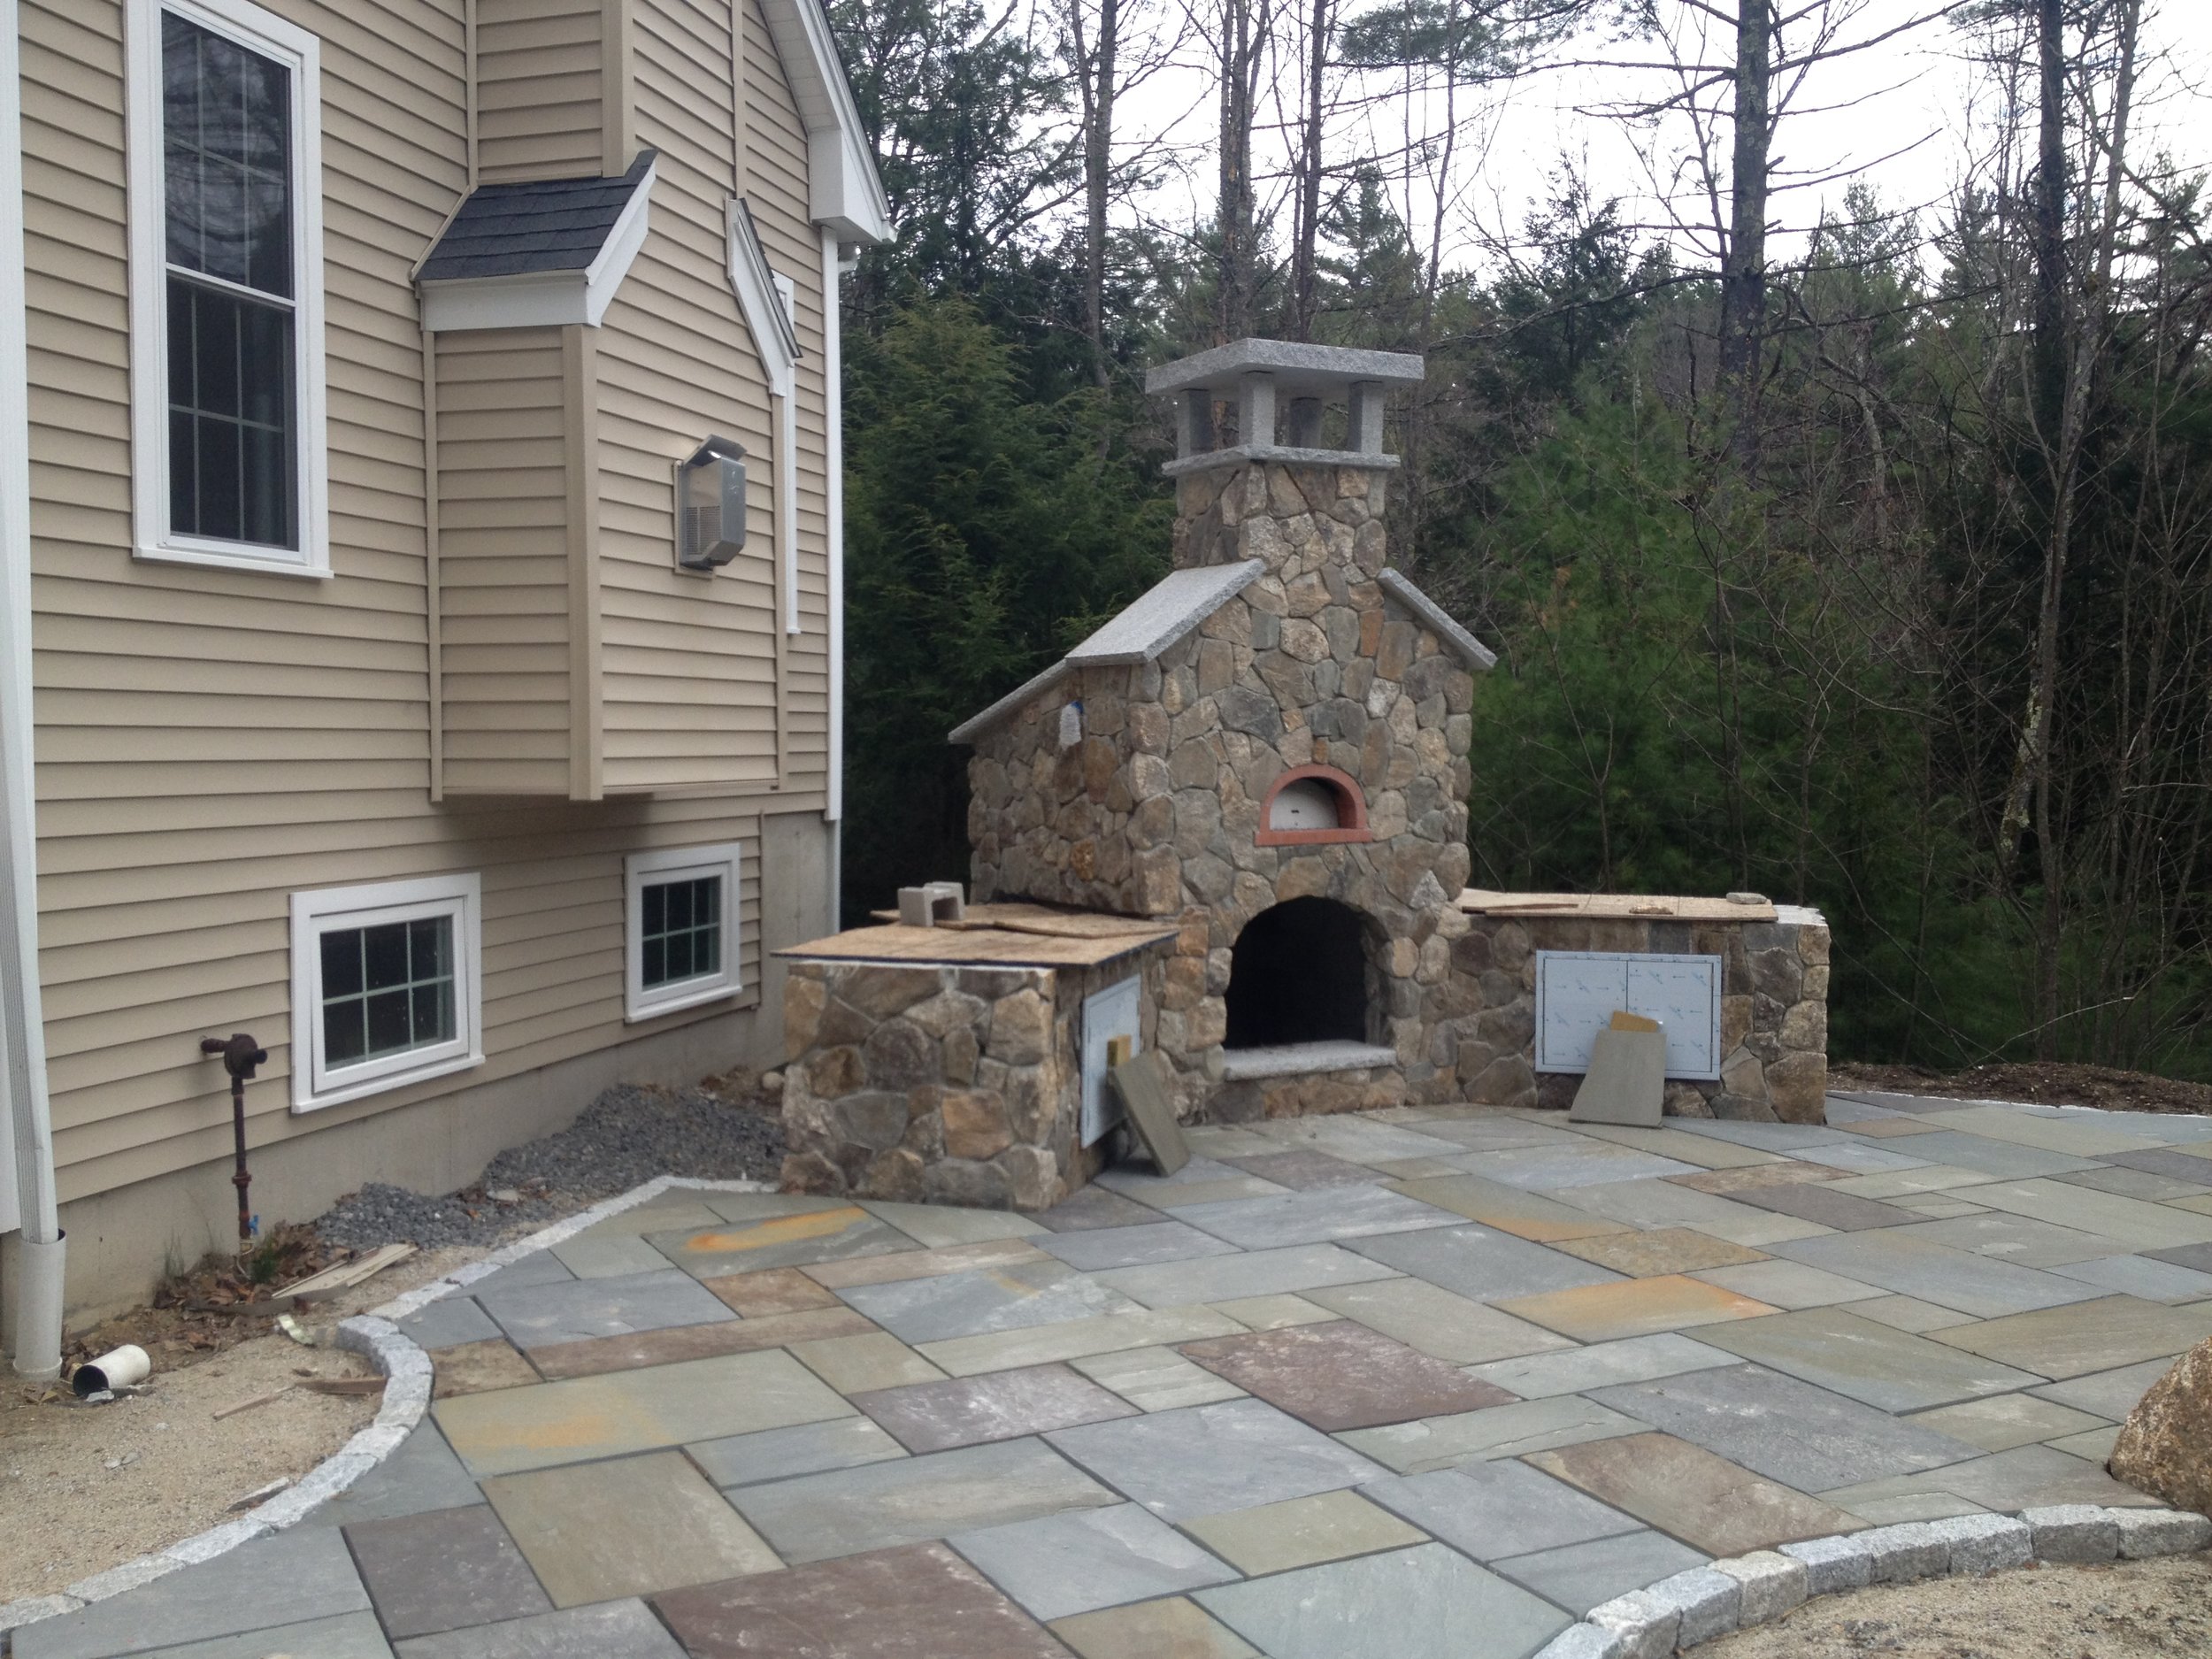 Professional landscape design with an outdoor fireplace in Waltham, MA.